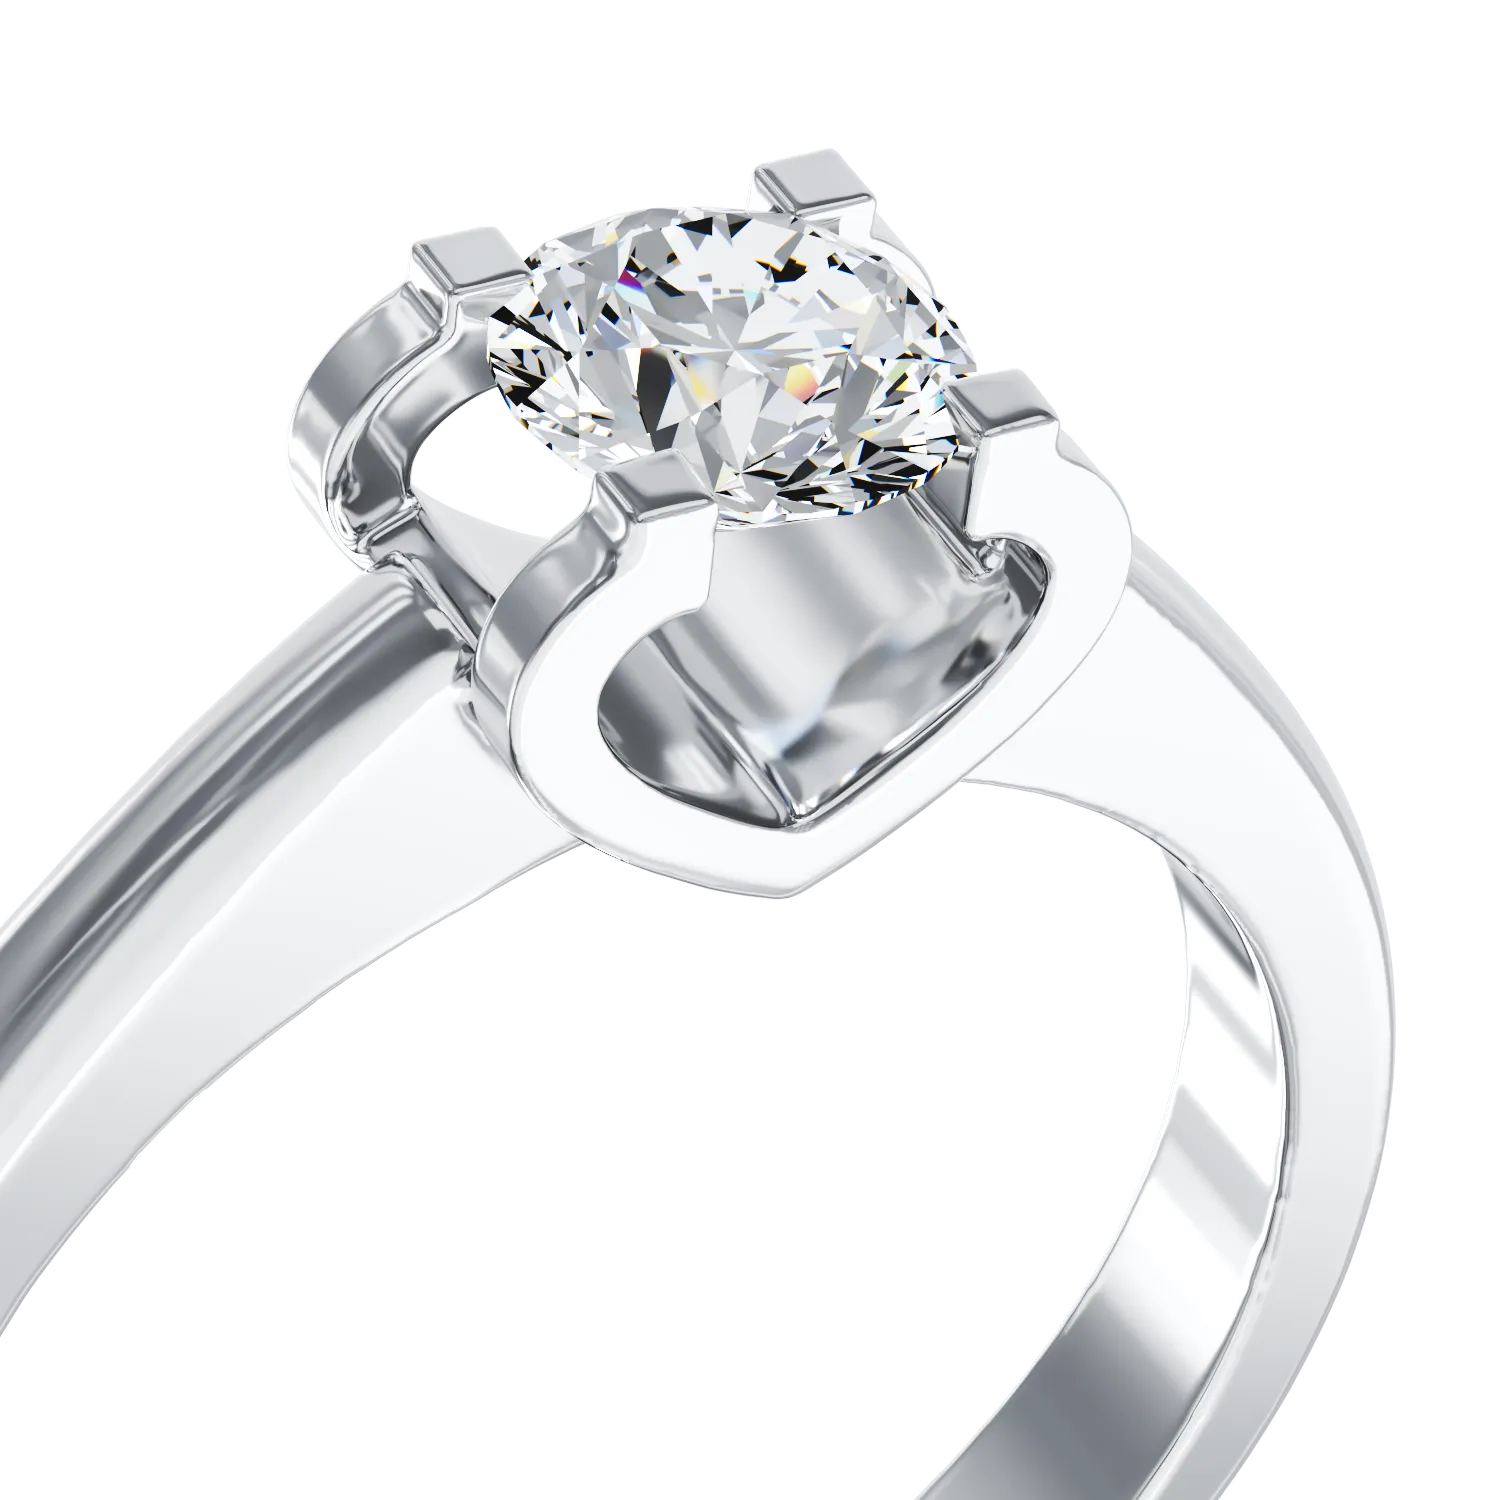 18K white gold engagement ring with 0.17ct solitaire diamond